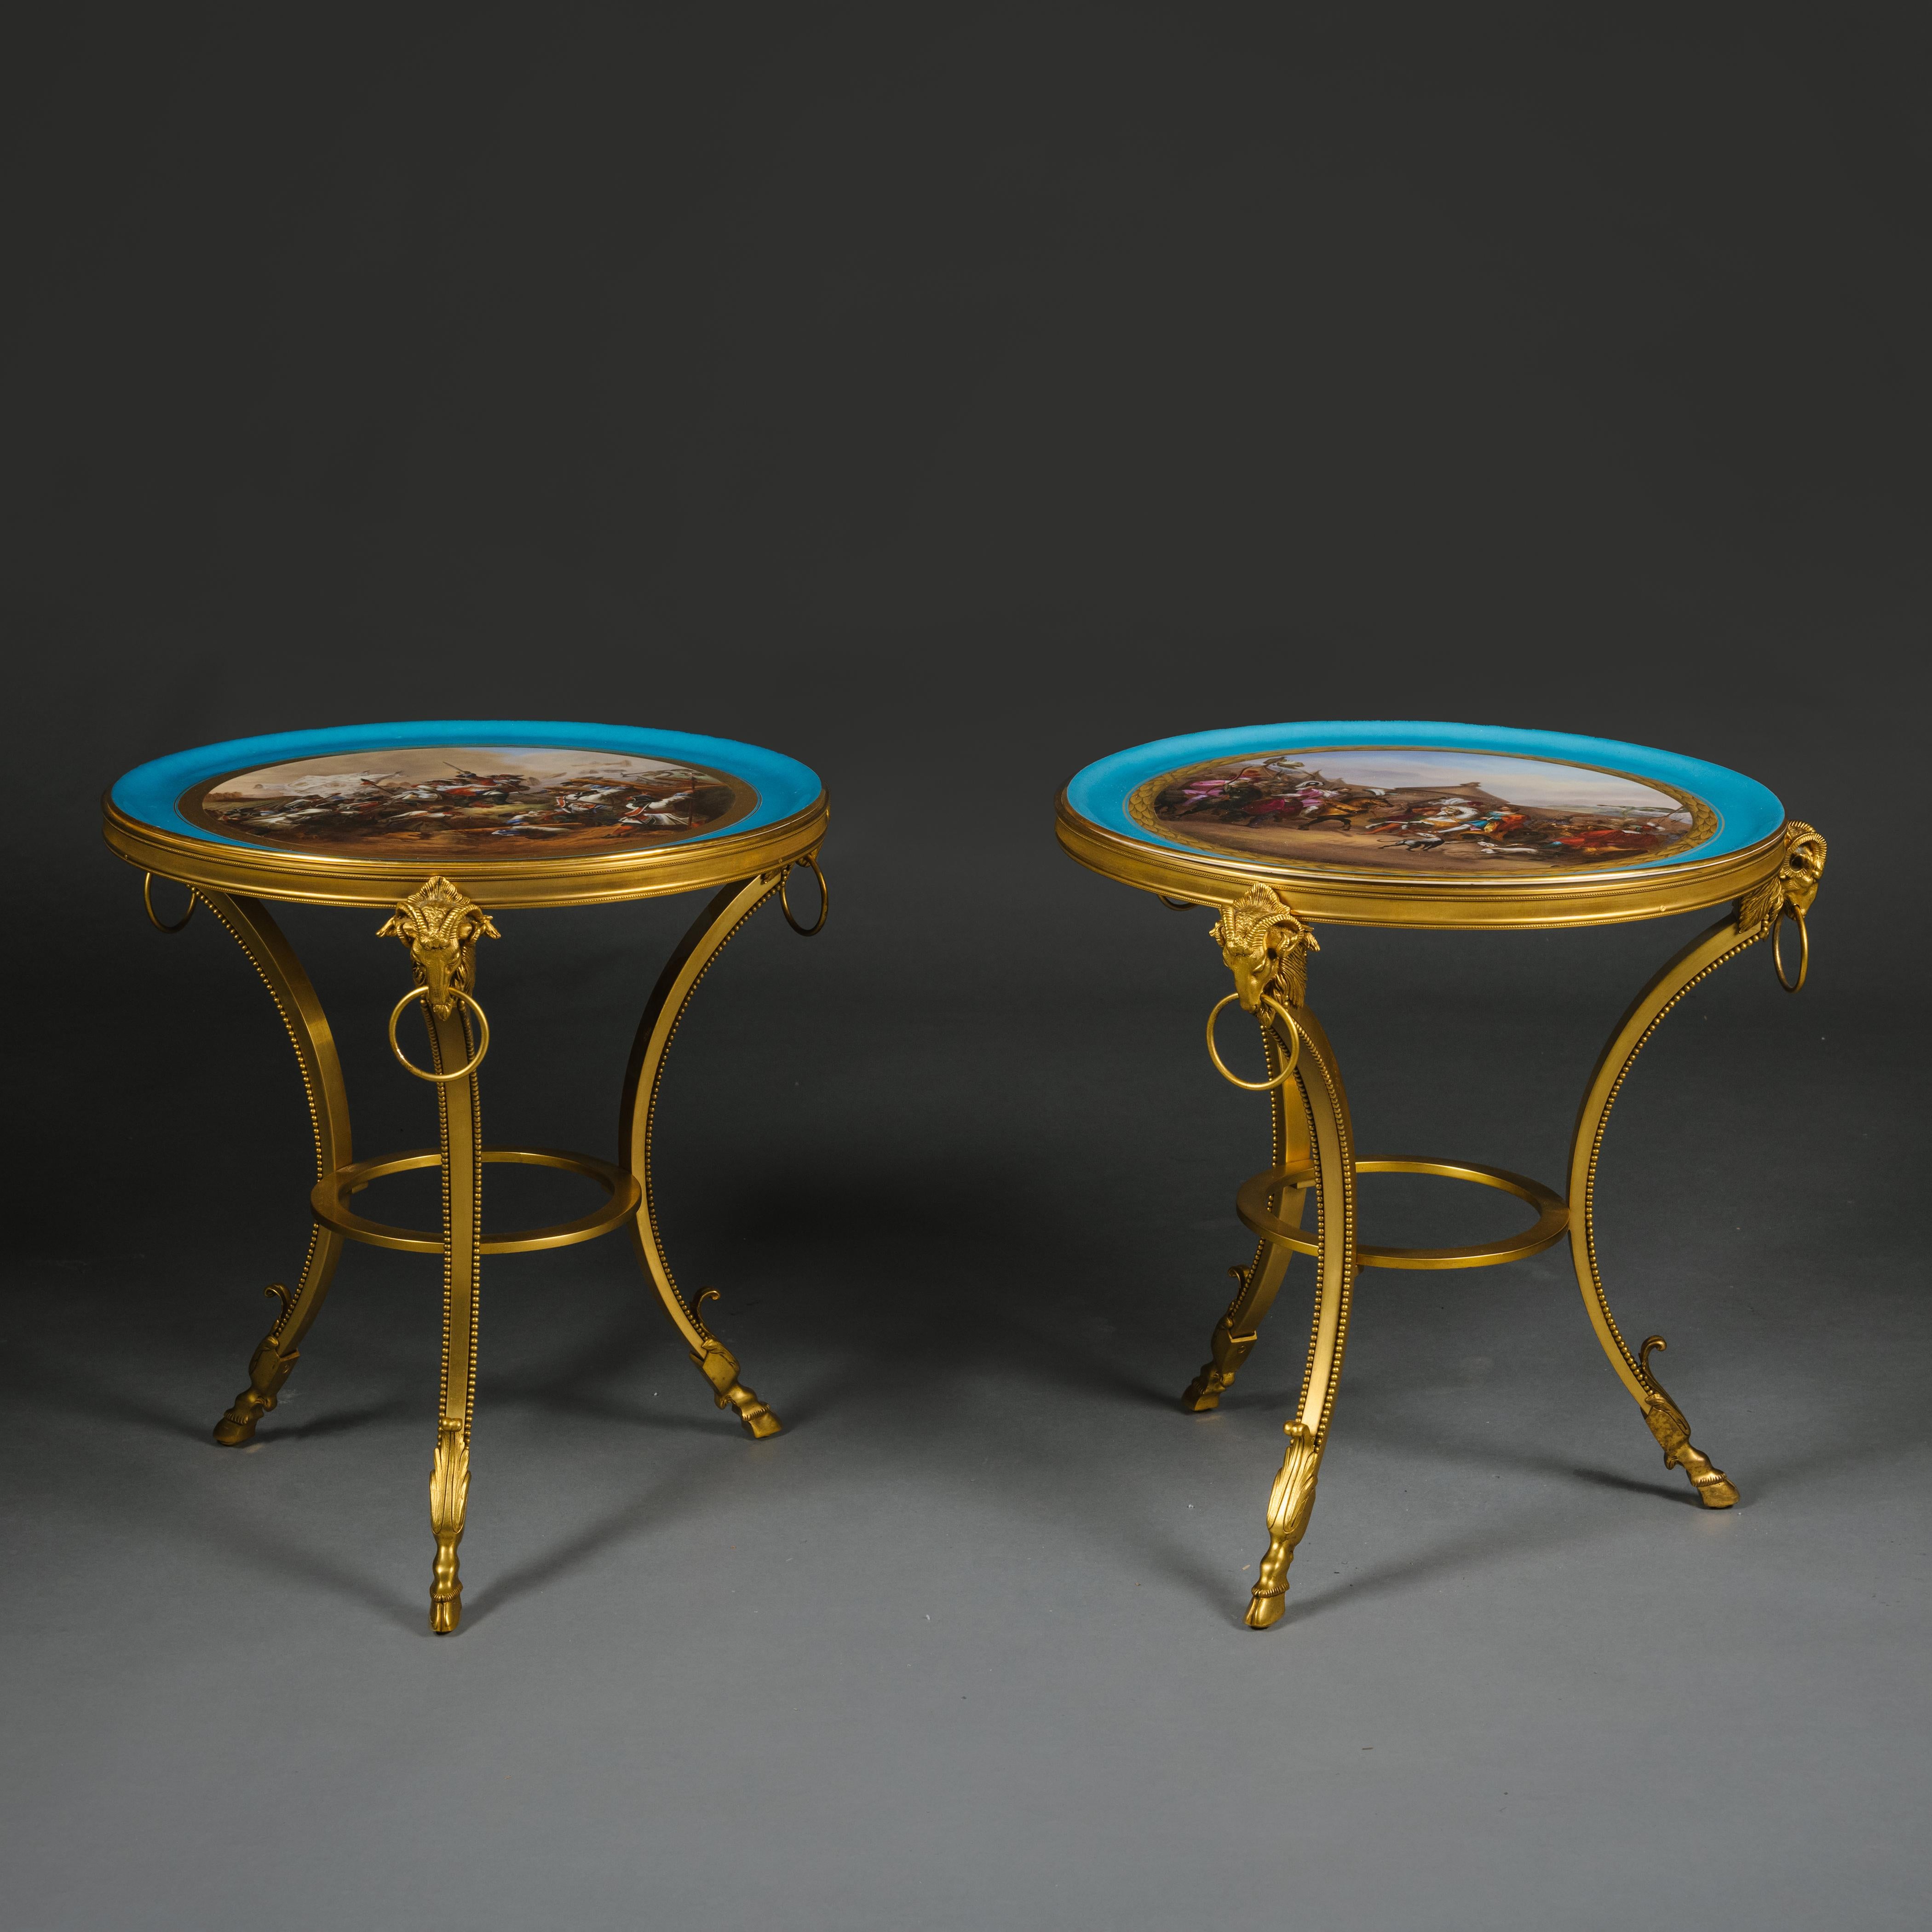 A Fine and Unusual Pair of Louis XVI Style Gilt-Bronze Low Side Tables With Sèvres-Style Porcelain Tops.

Each table has a fine Sèvres-style porcelain charger painted with historical battle scenes within bleu céleste borders supported on finely cast